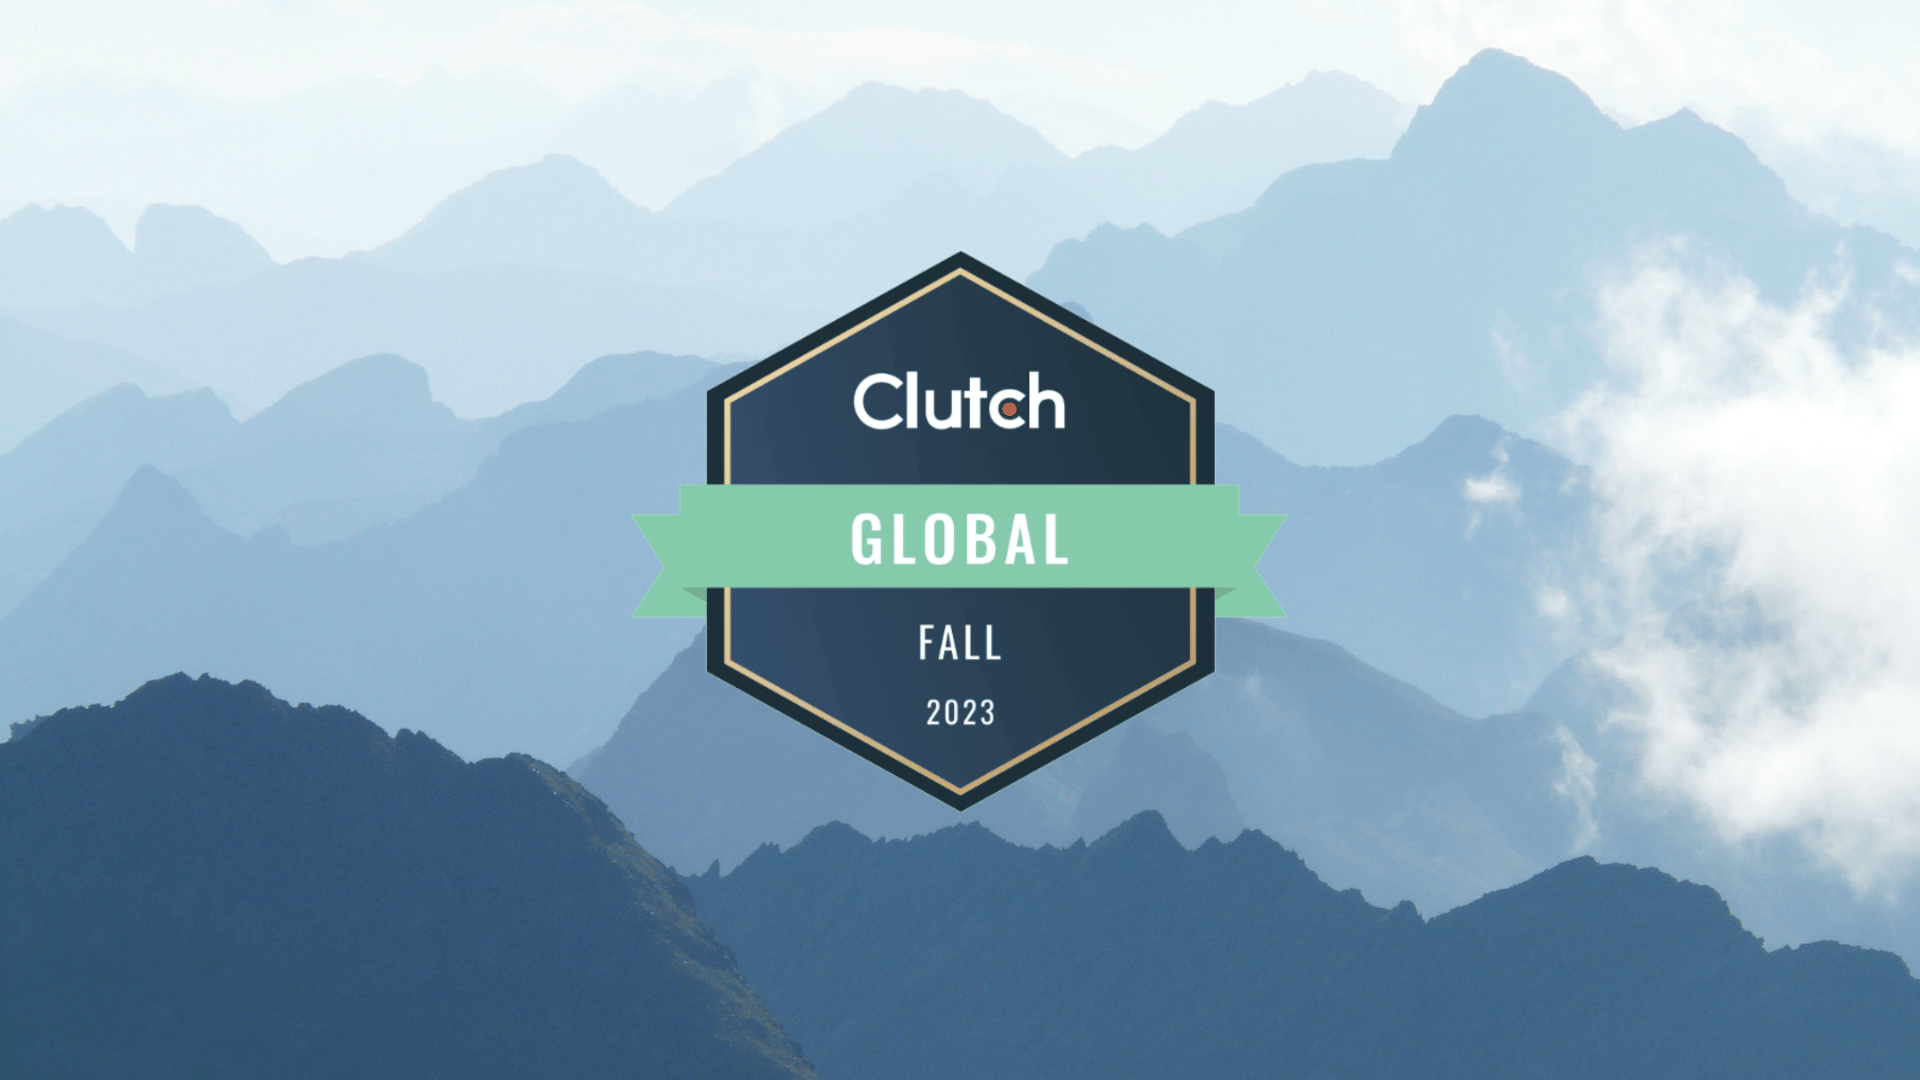 CrewBloom Recognized as a Clutch Global Leader for 2023